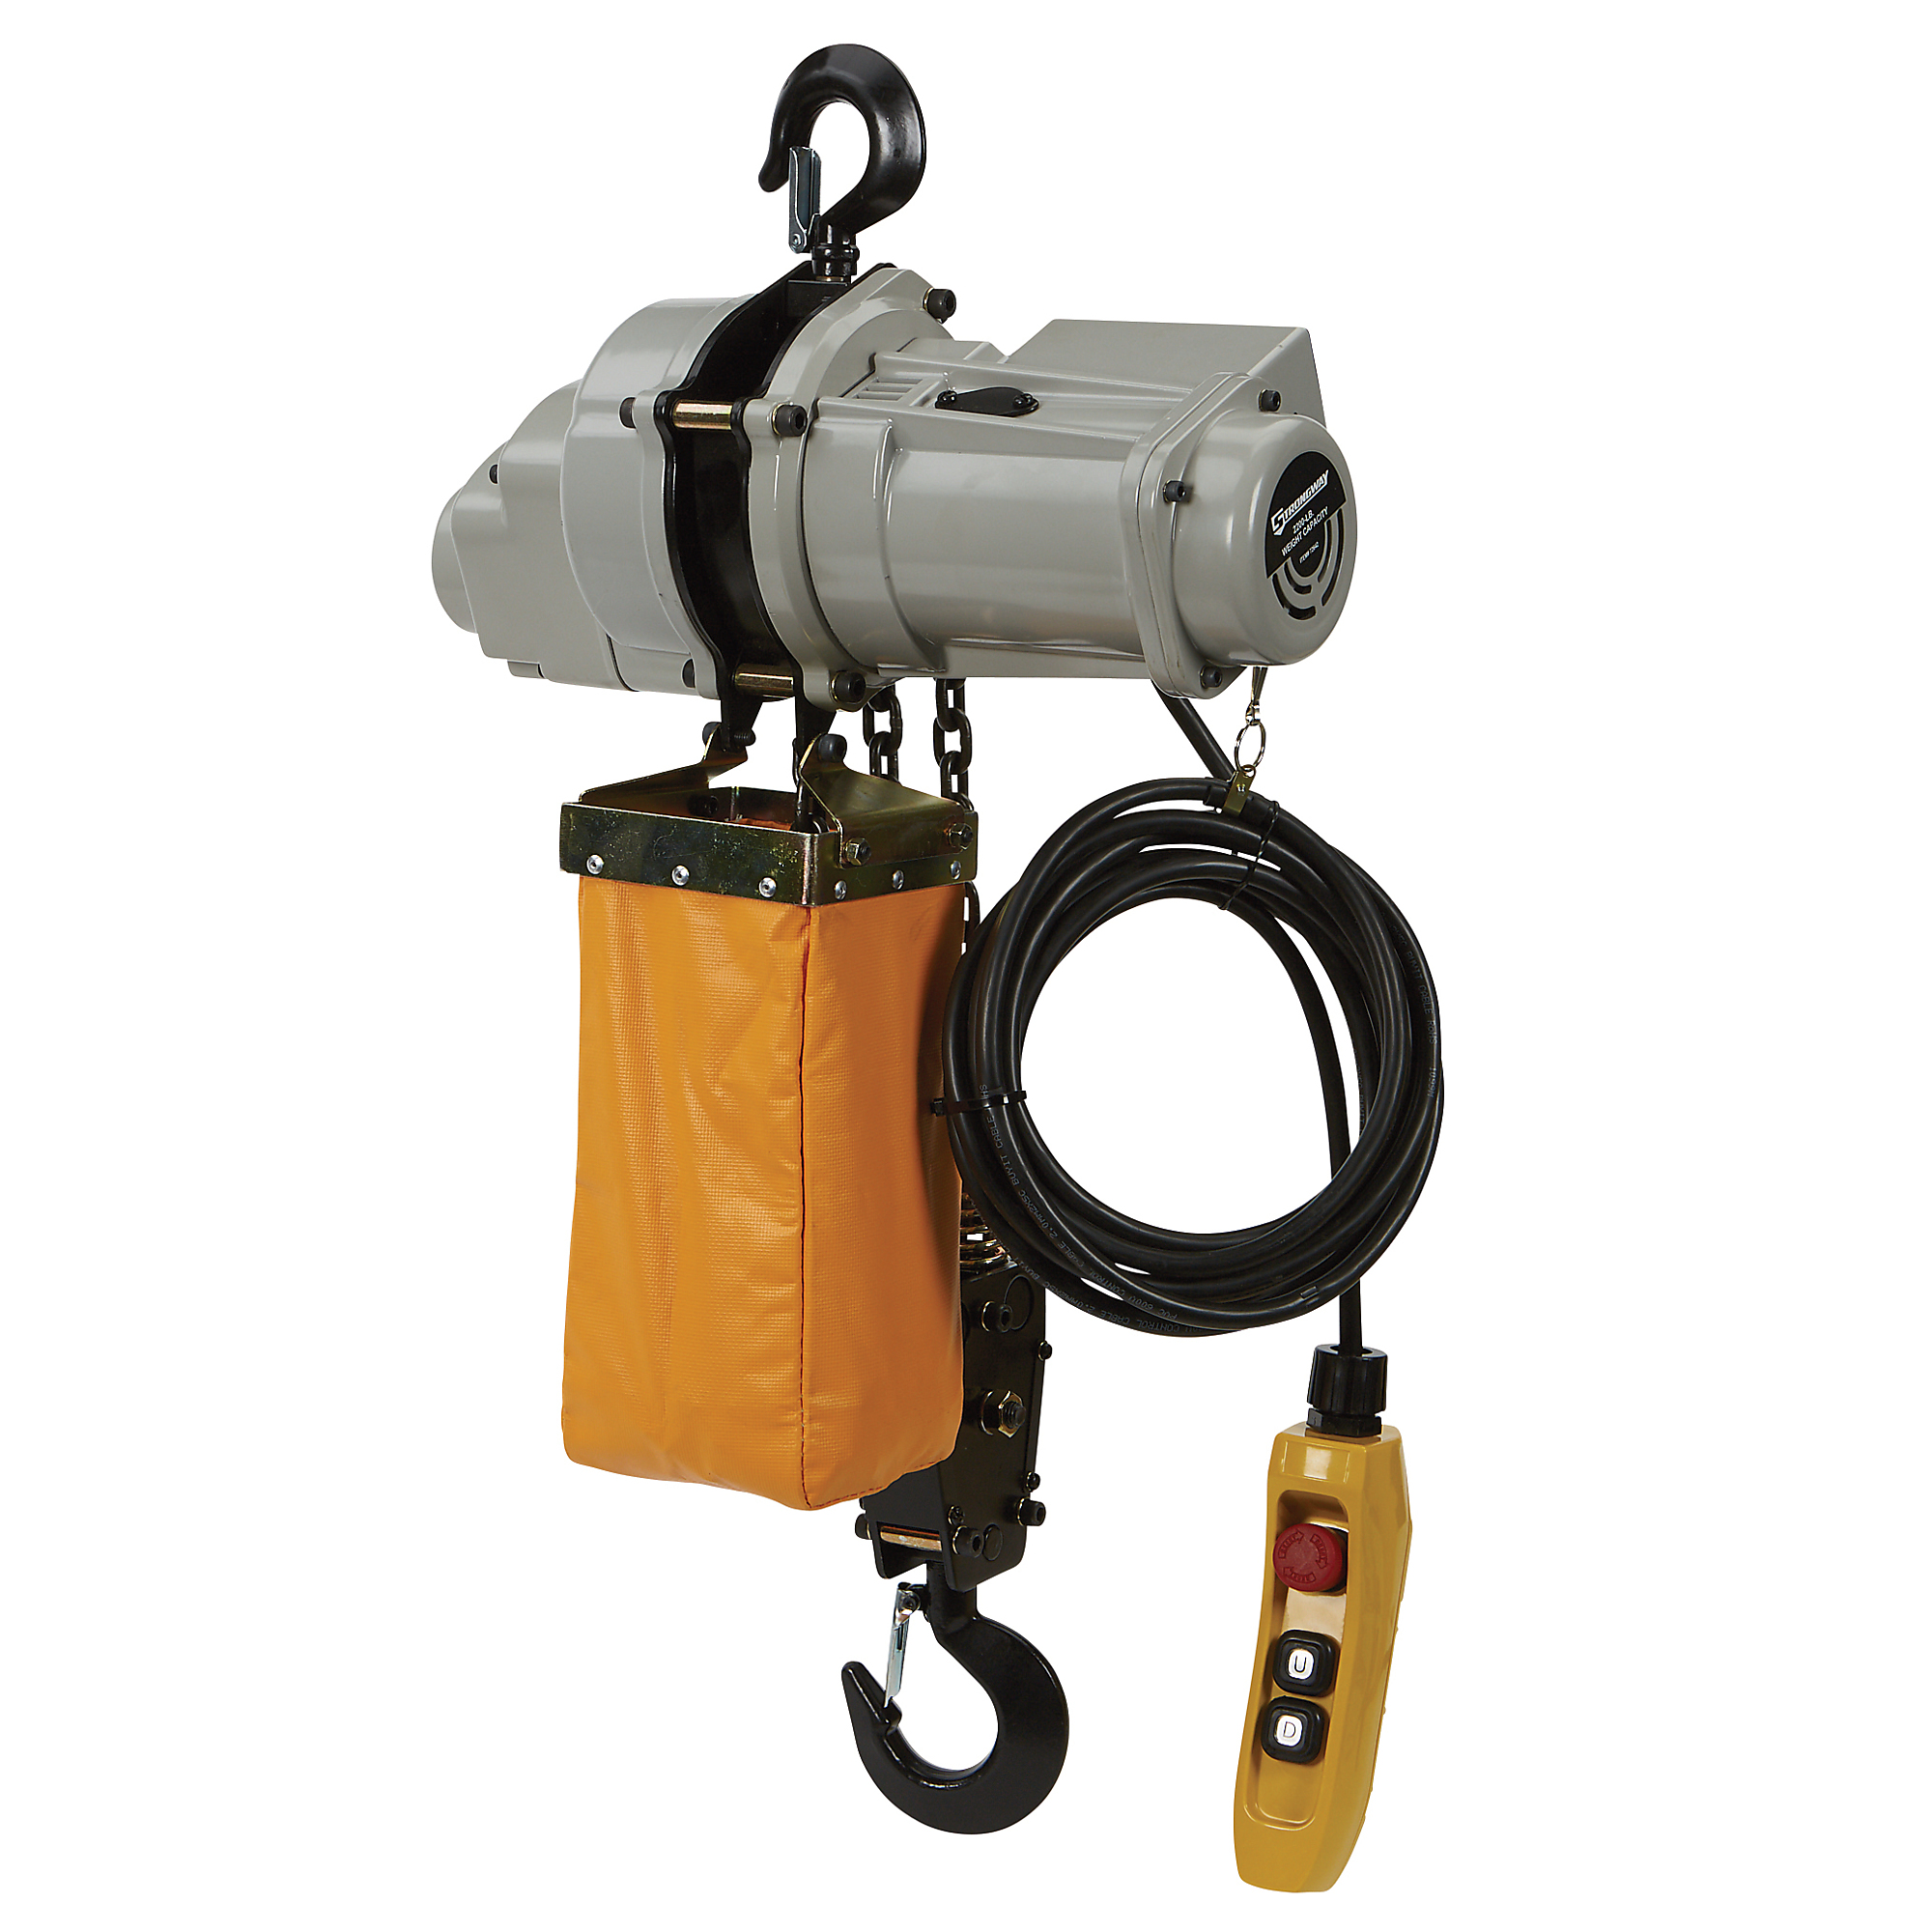 Strongway 1-Ton Load Capacity, 9.8ft. Lift Electric Chain Hoist